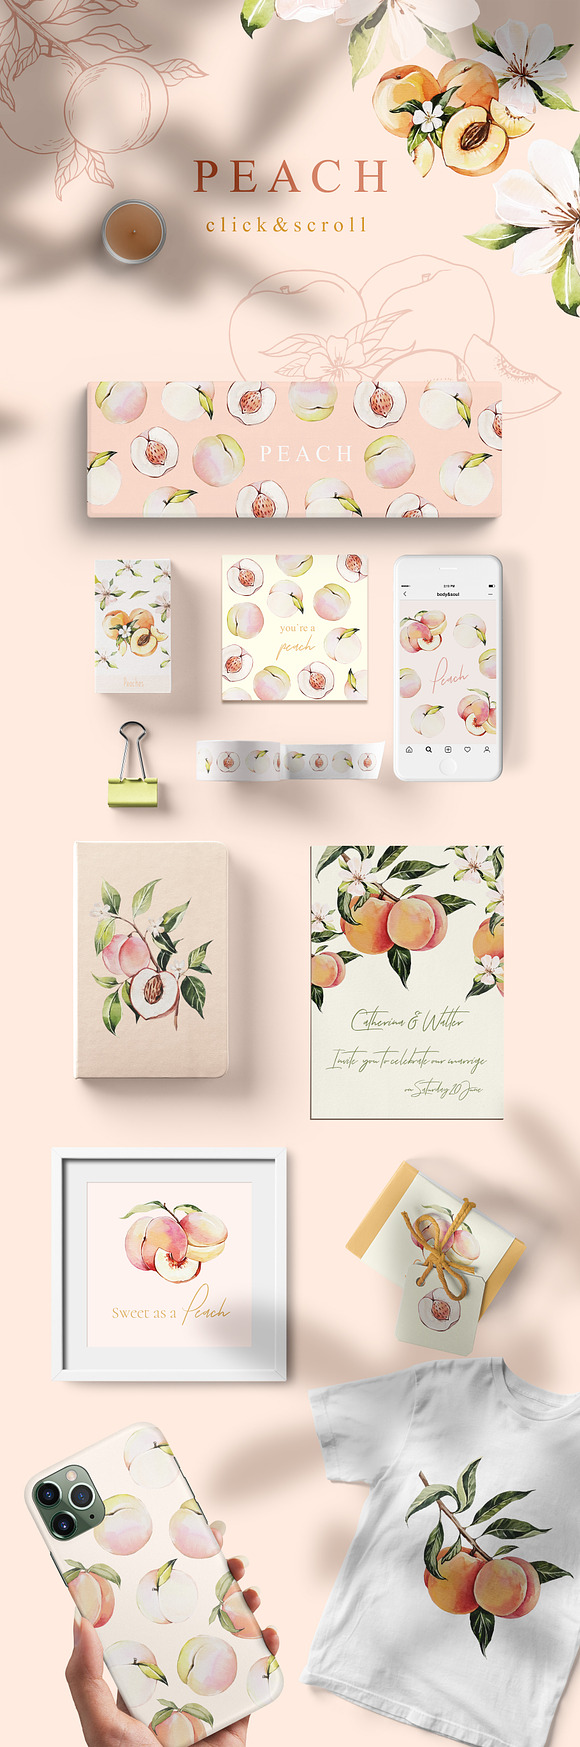 FLOWERS & FRUITS in Illustrations - product preview 1